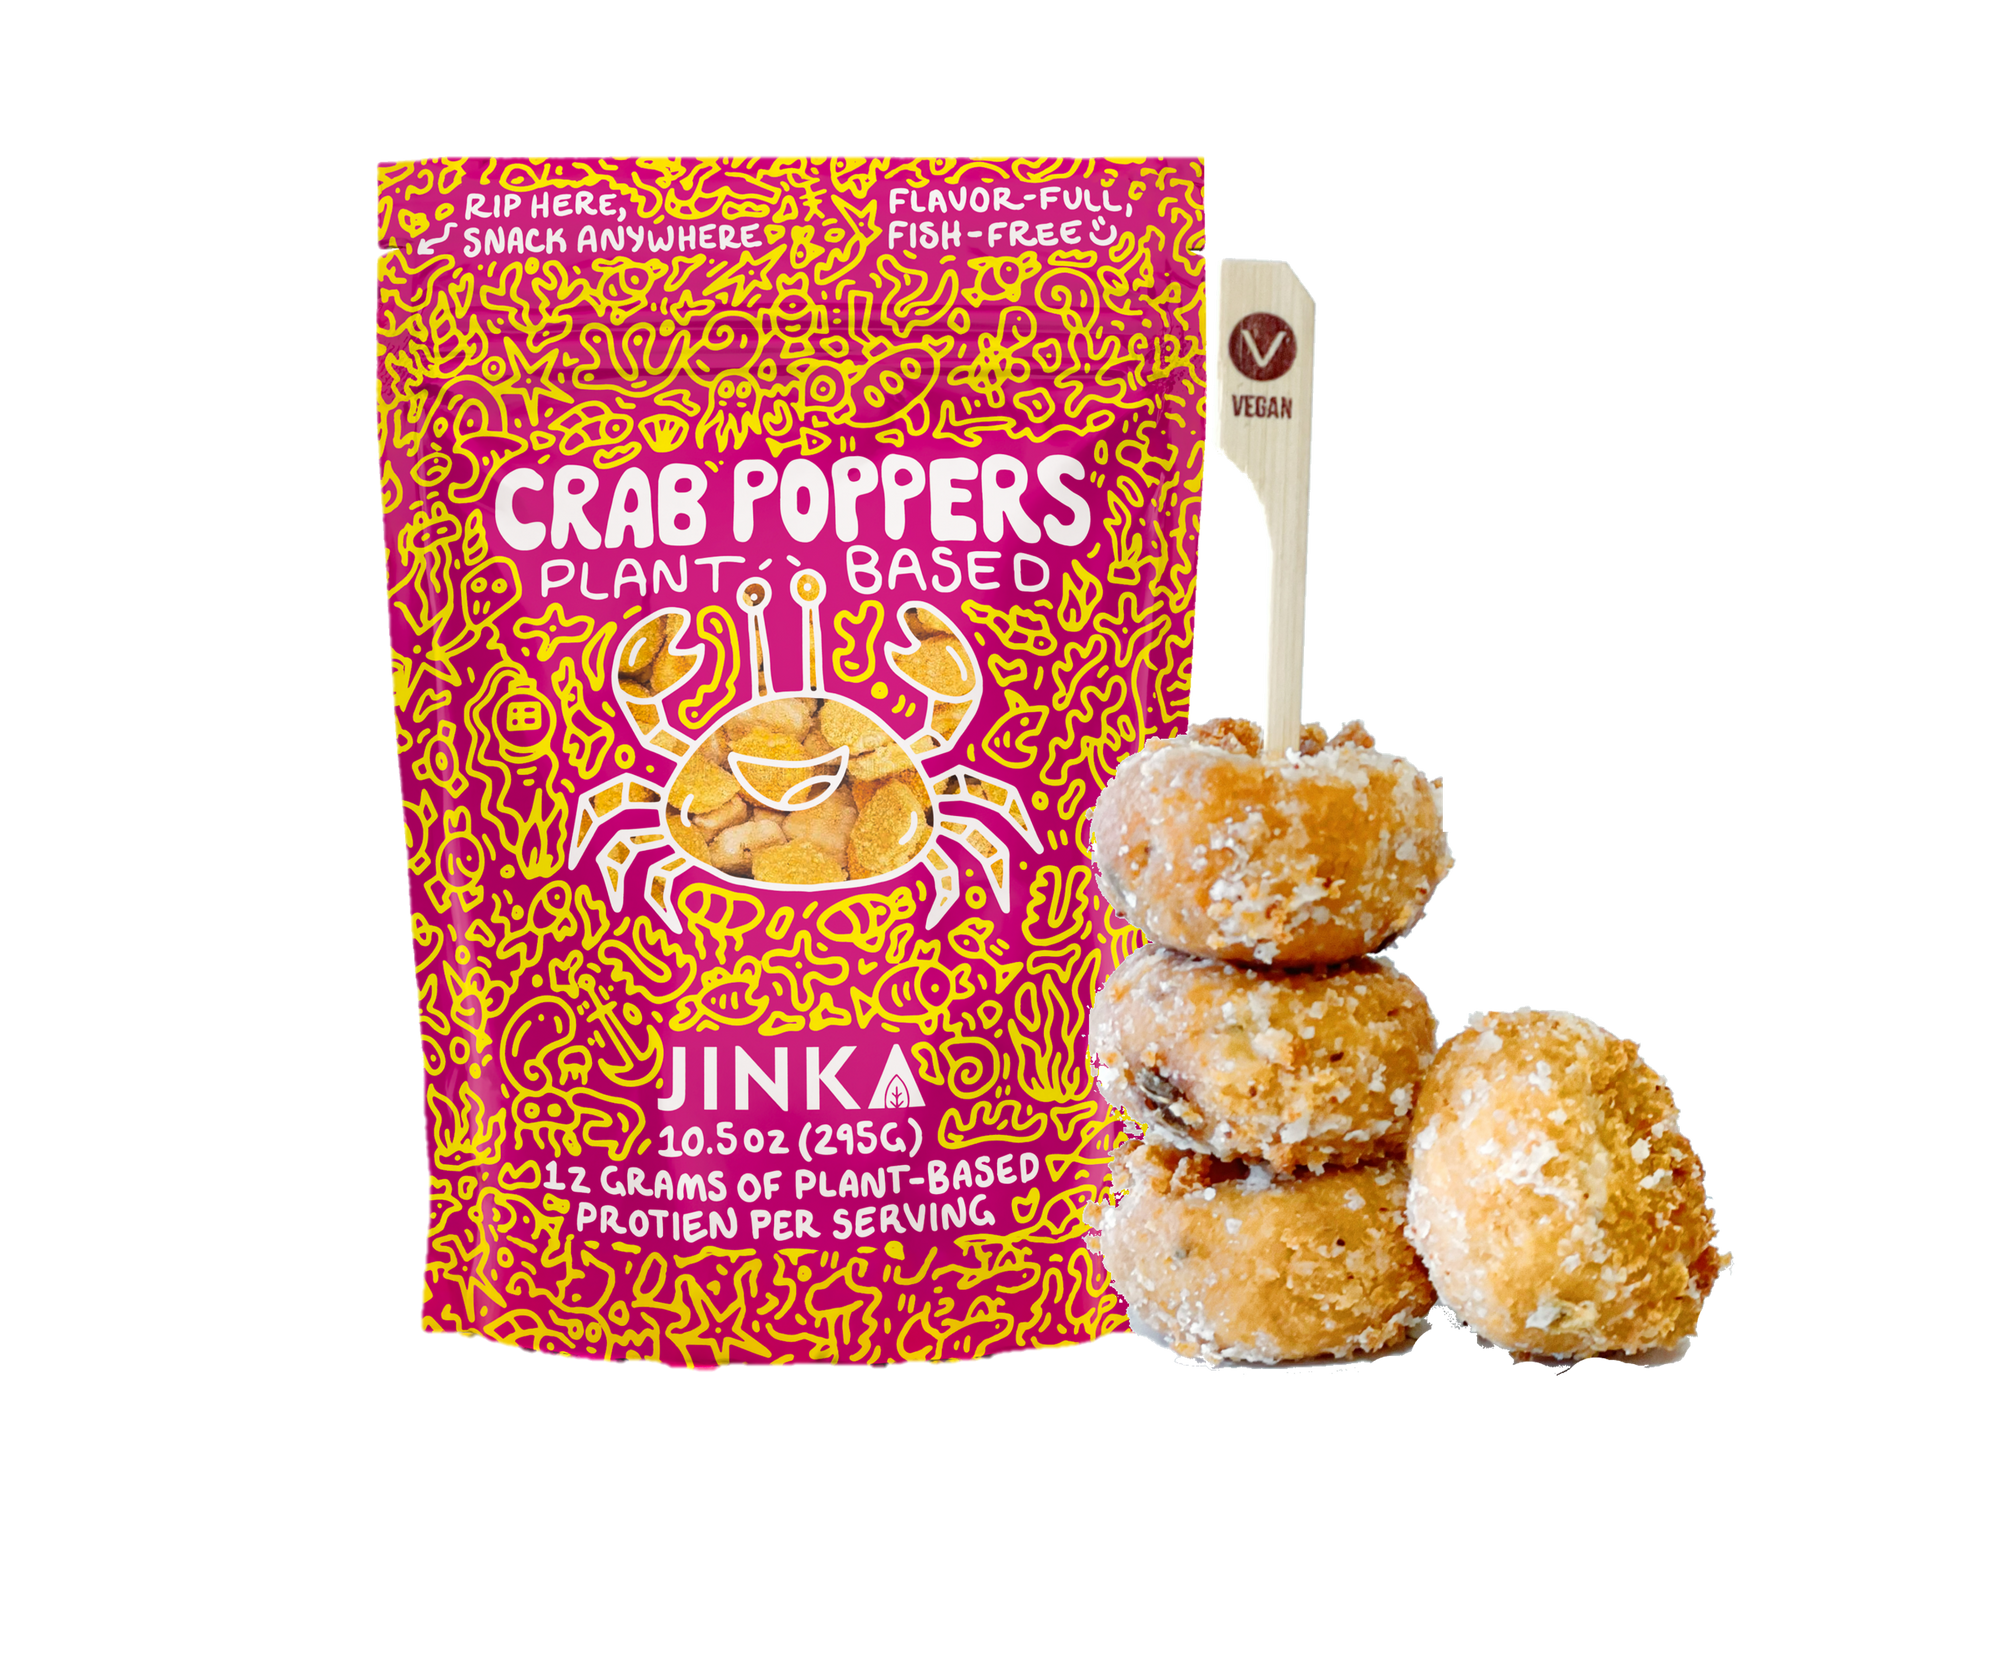 NEW ITEM! Plant-Based Crab Poppers